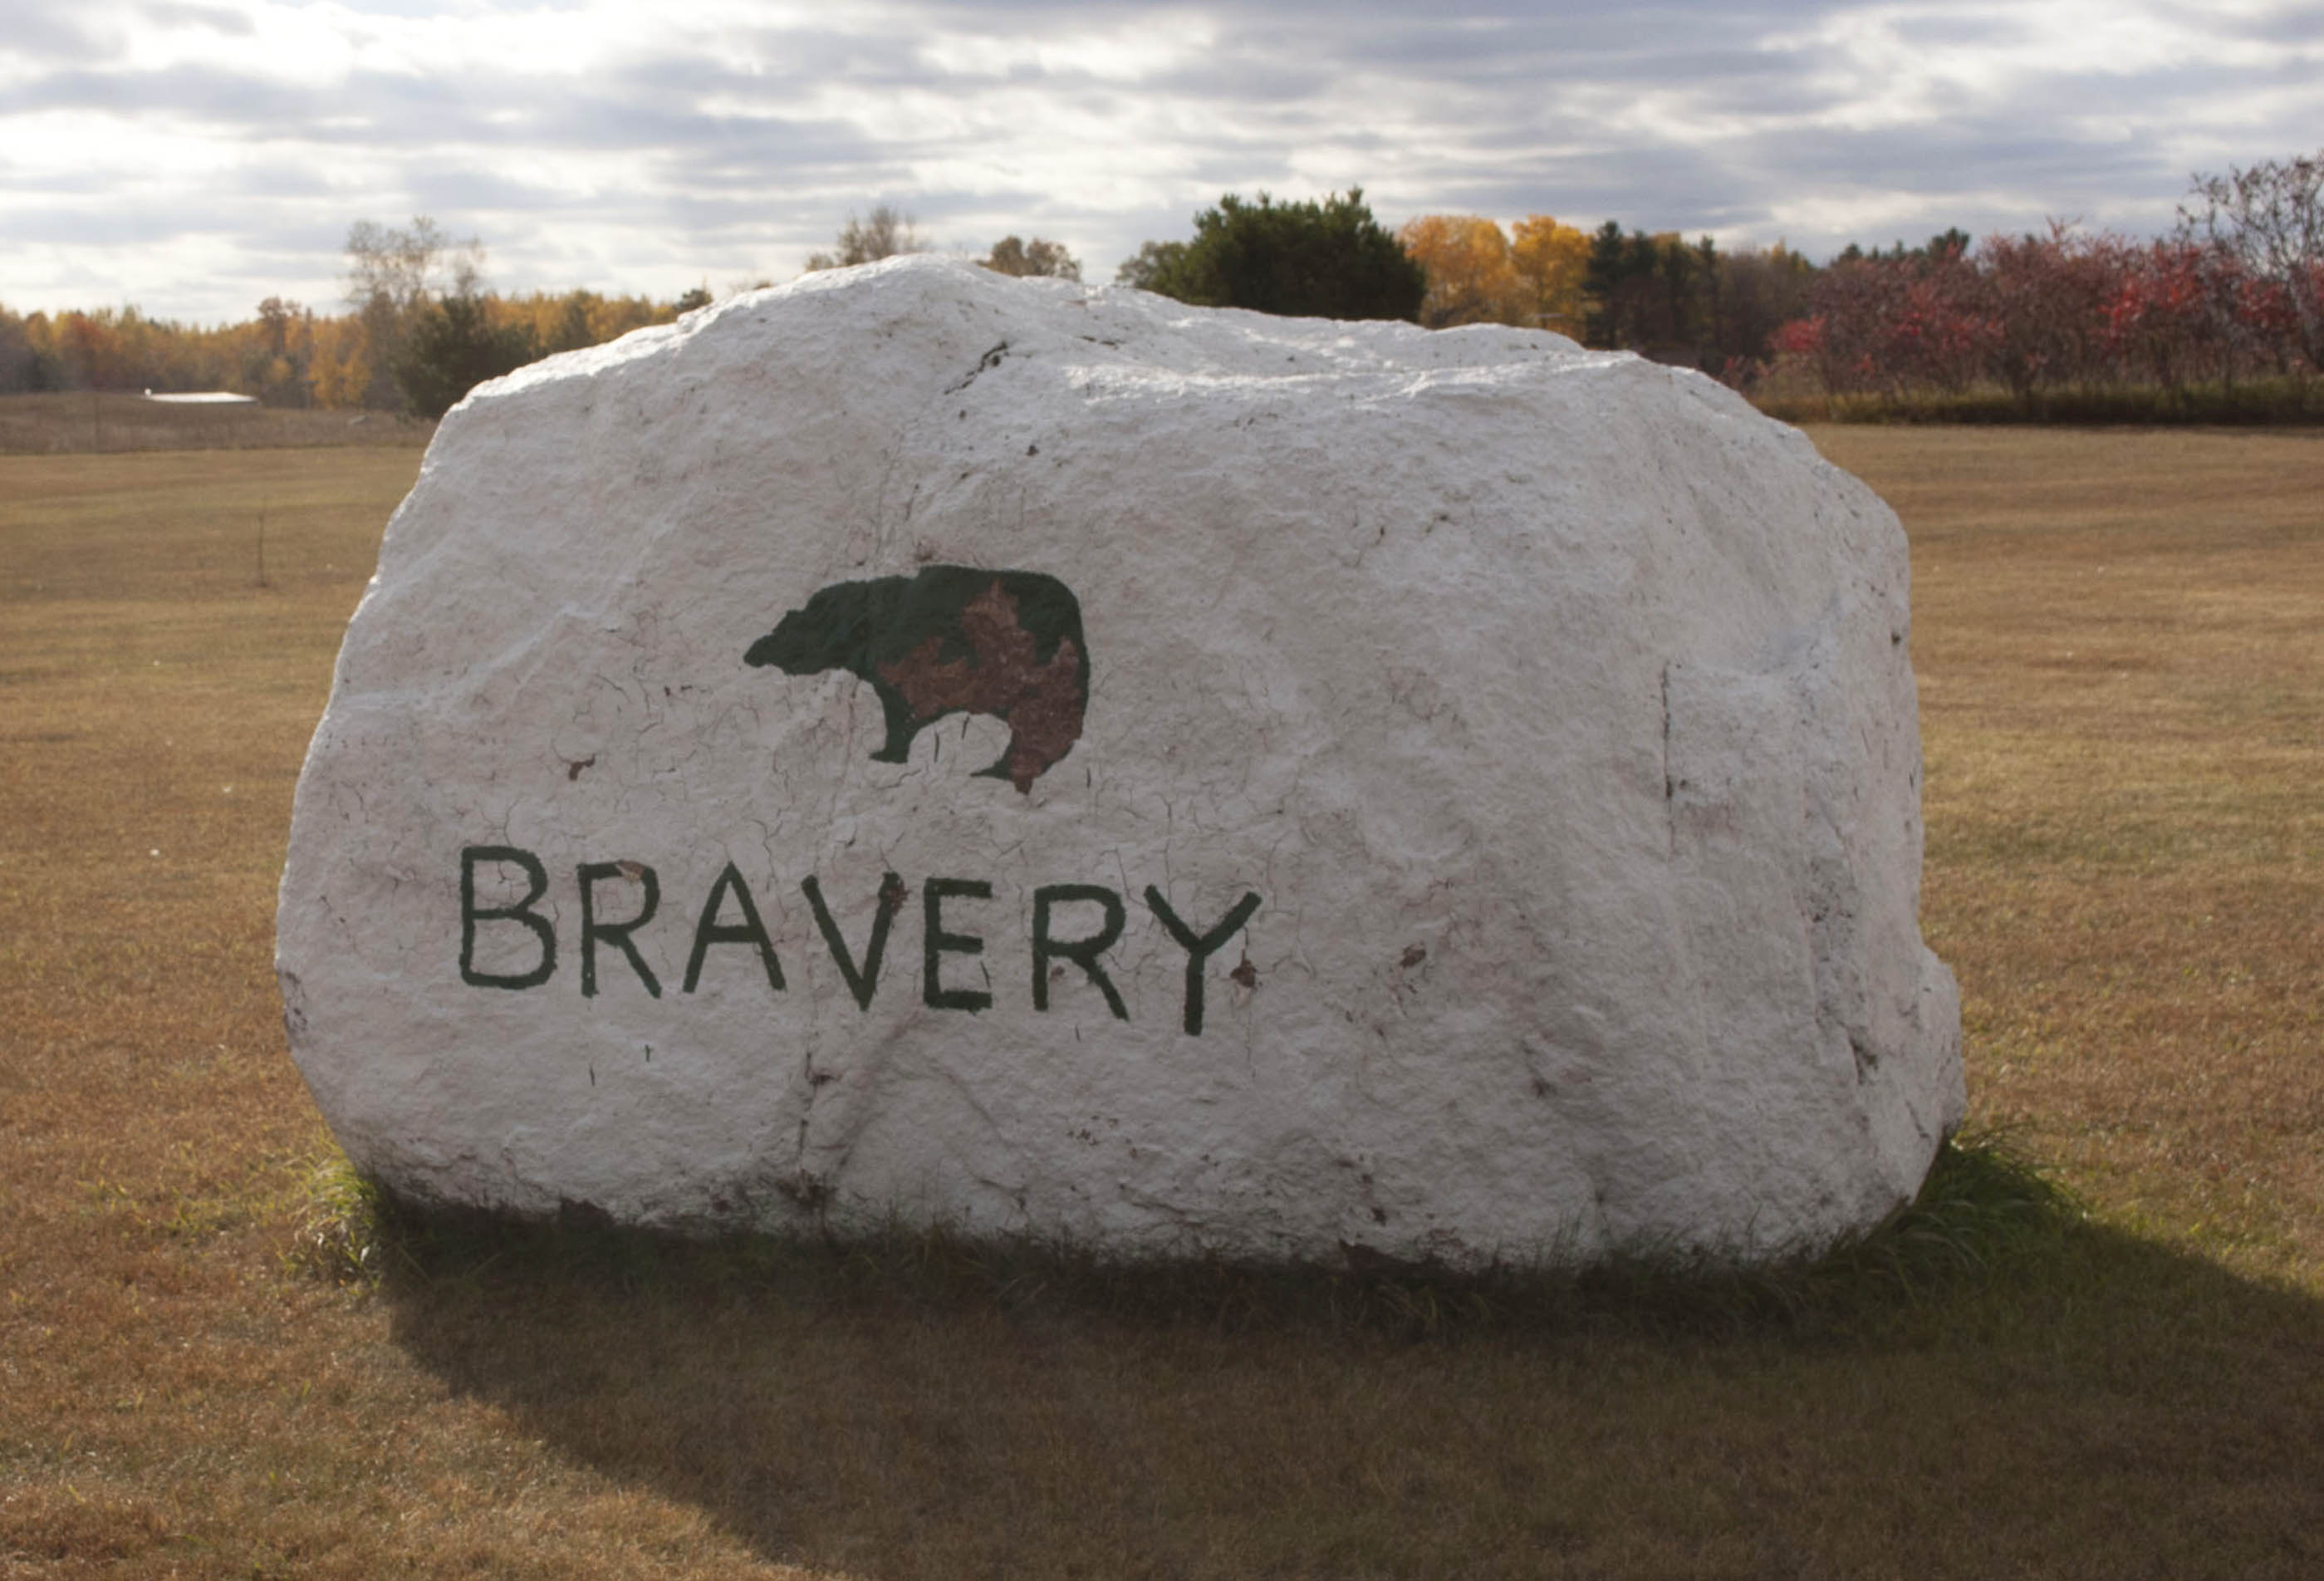 Bravery is one of the seven gifts given to the Menominee people from the Great Grandfather.
Photo by: Emily Genco